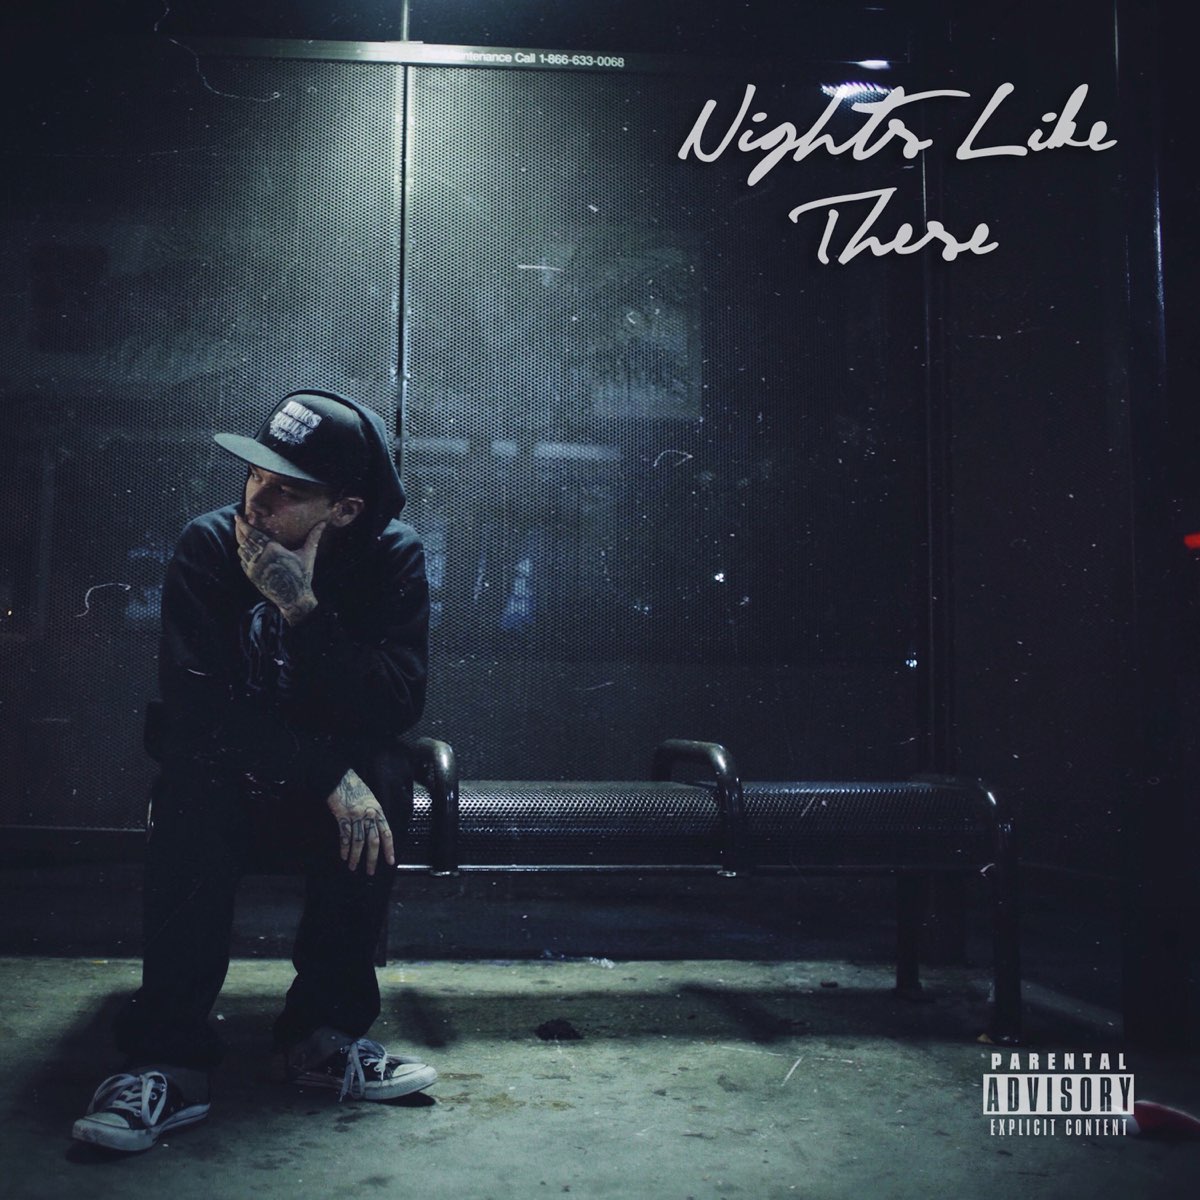 ‎Nights Like These by Phora on Apple Music